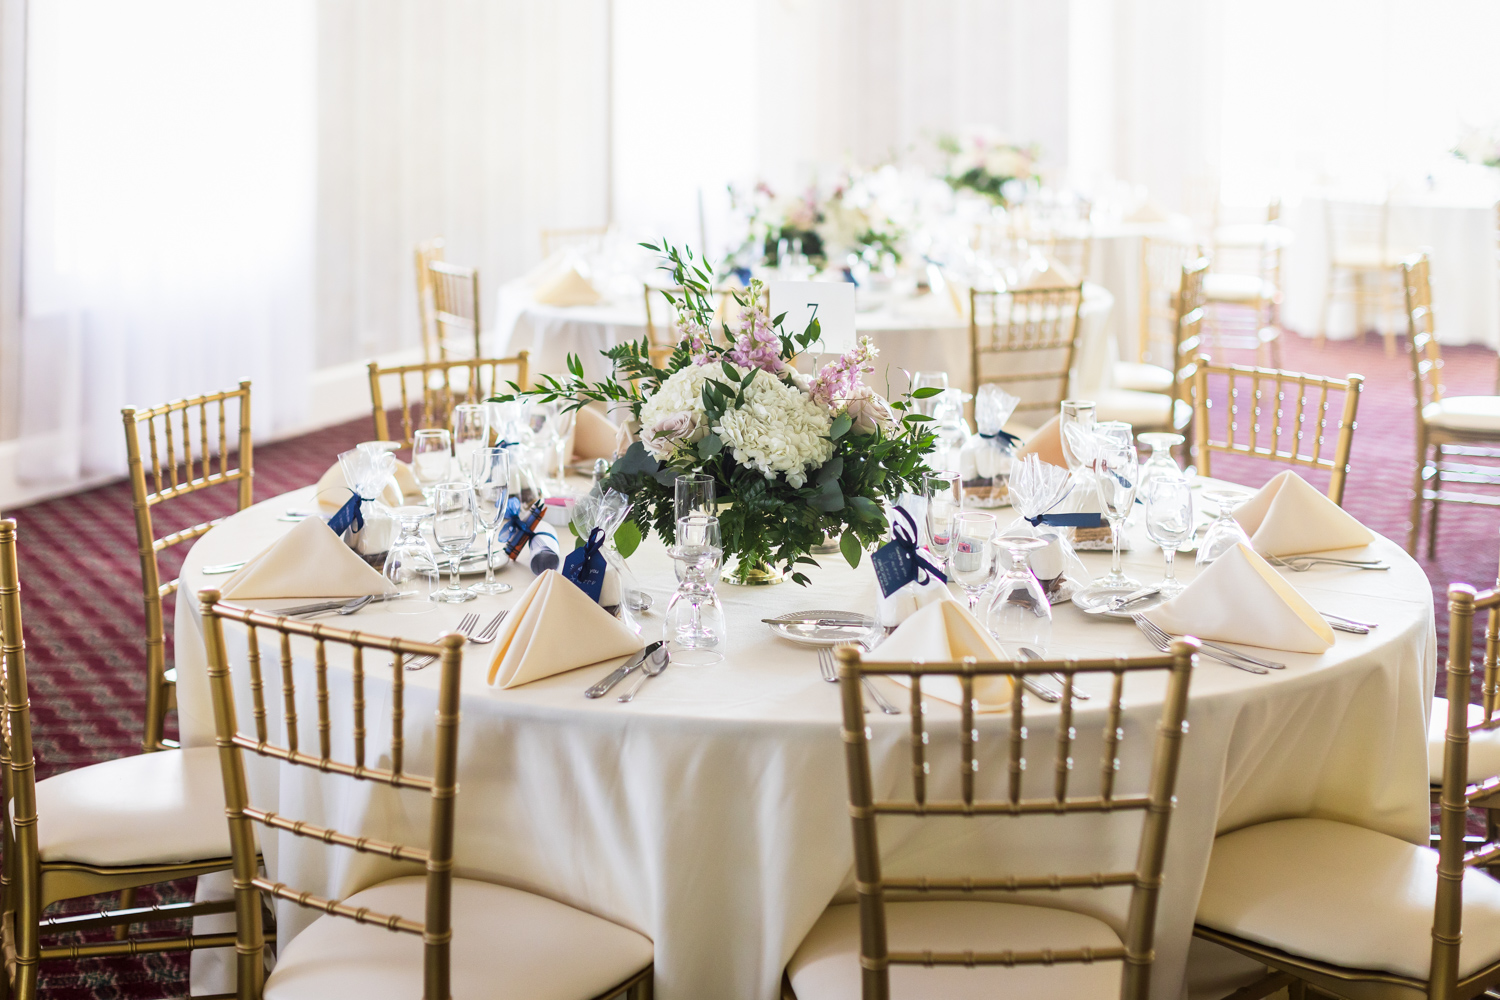 A table decorated for a wedding with white flowers and white tableware.